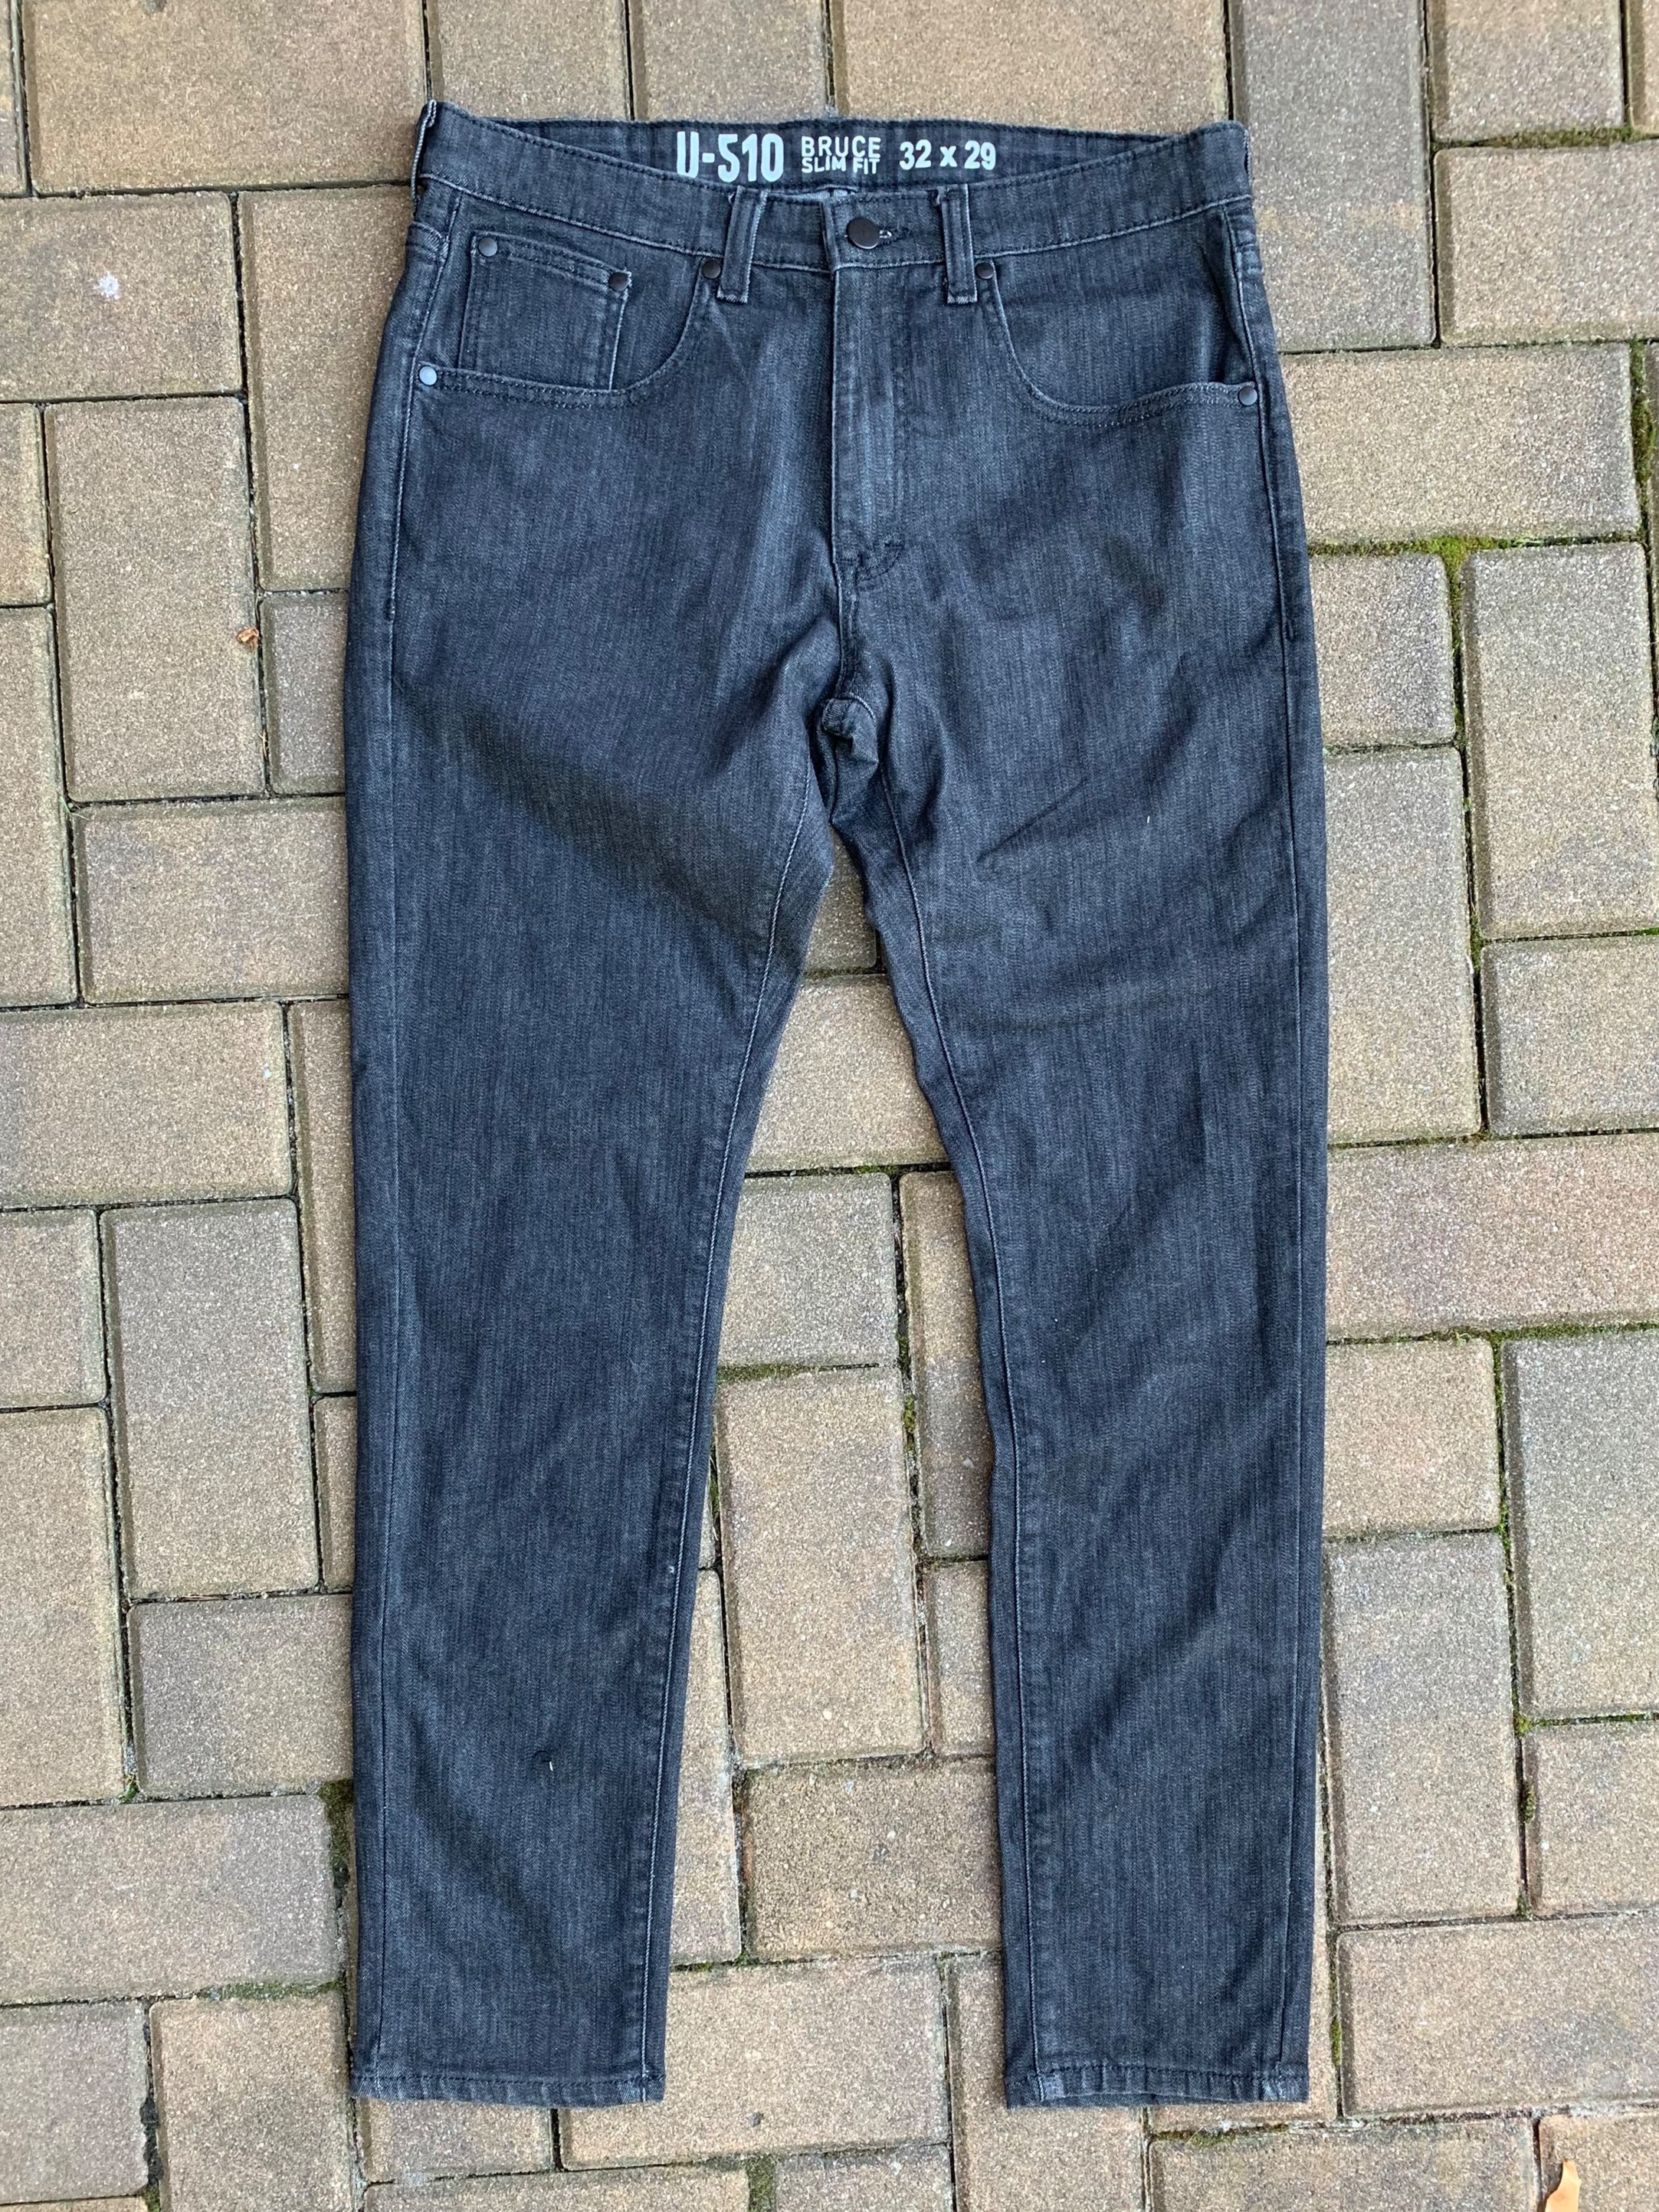 Under 510 Bruce Jean Review - The New Jeans for Short Guys — The Mensch